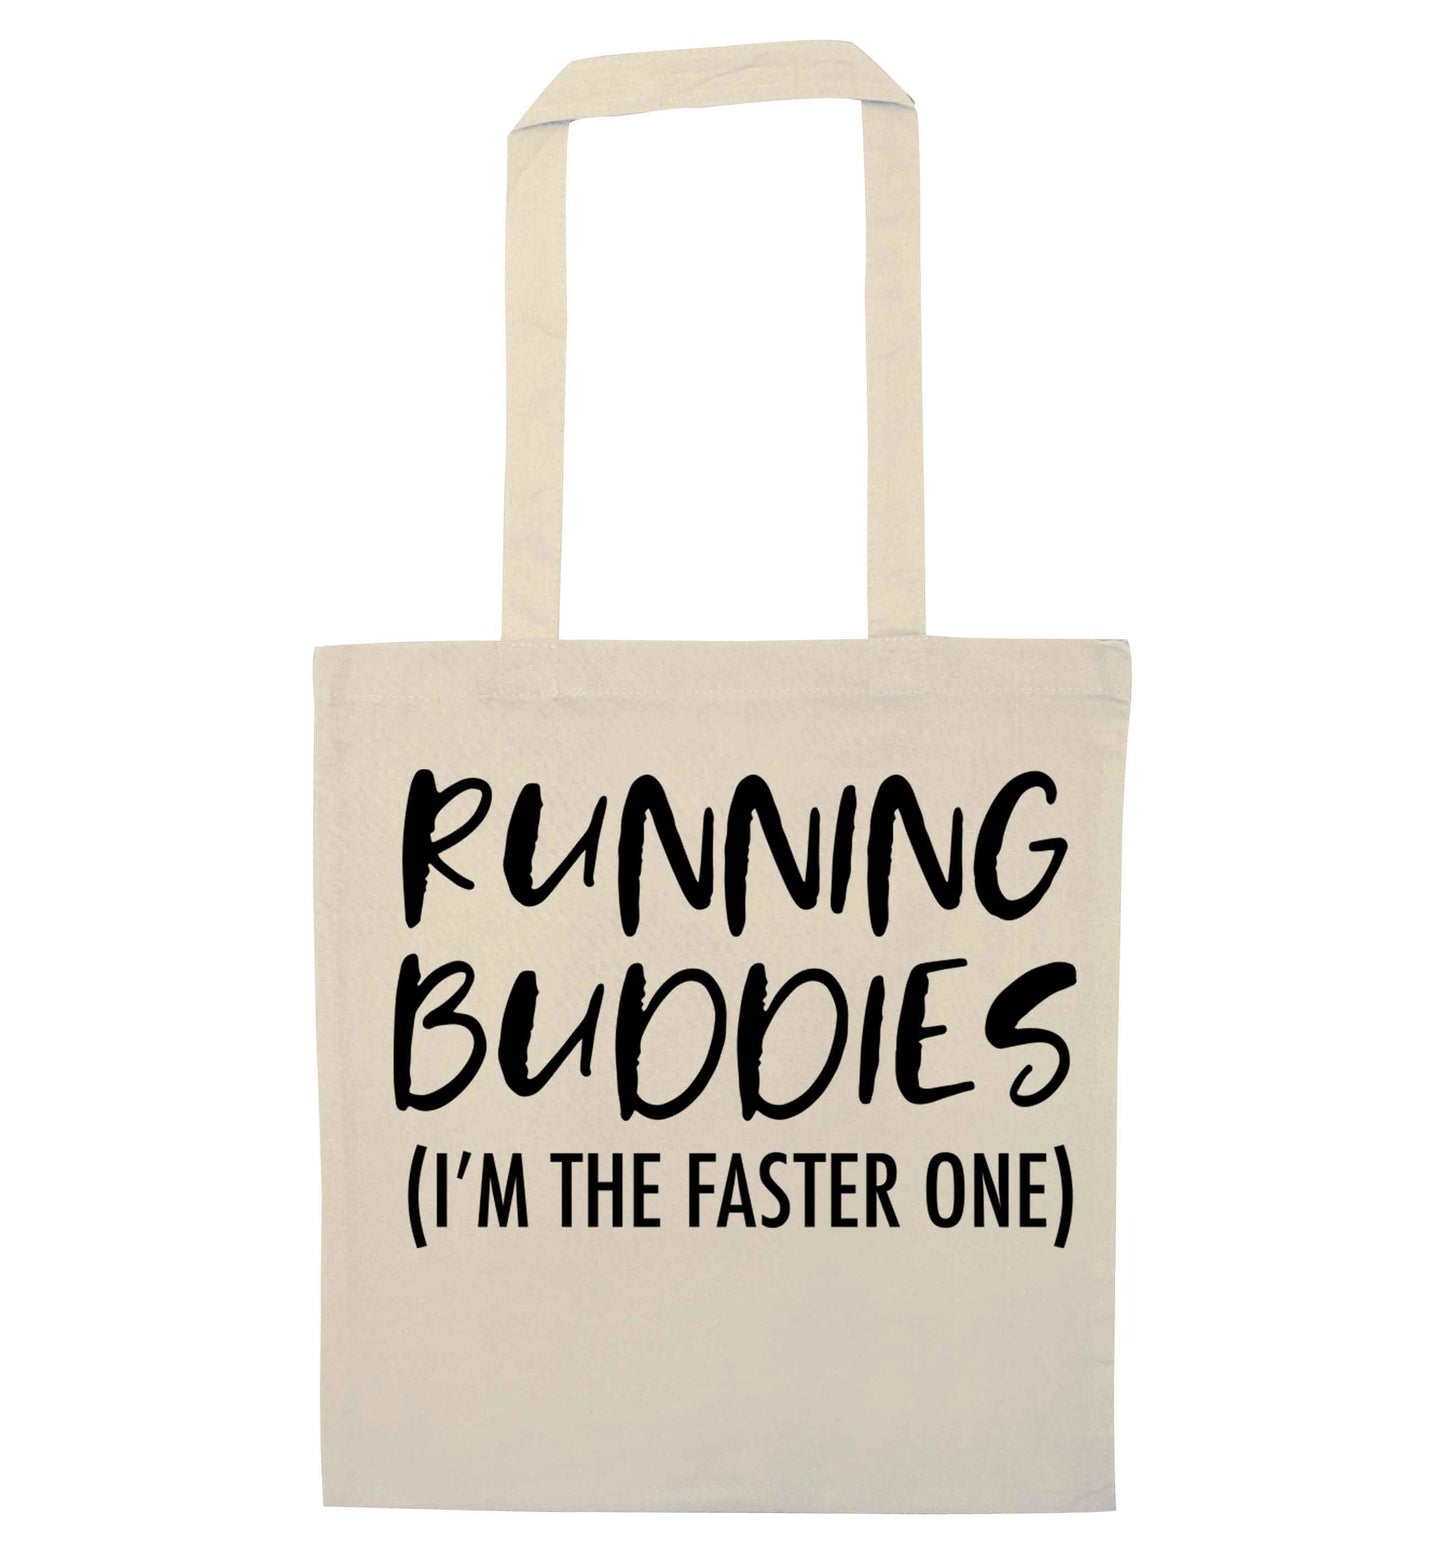 Running buddies (I'm the faster one) natural tote bag